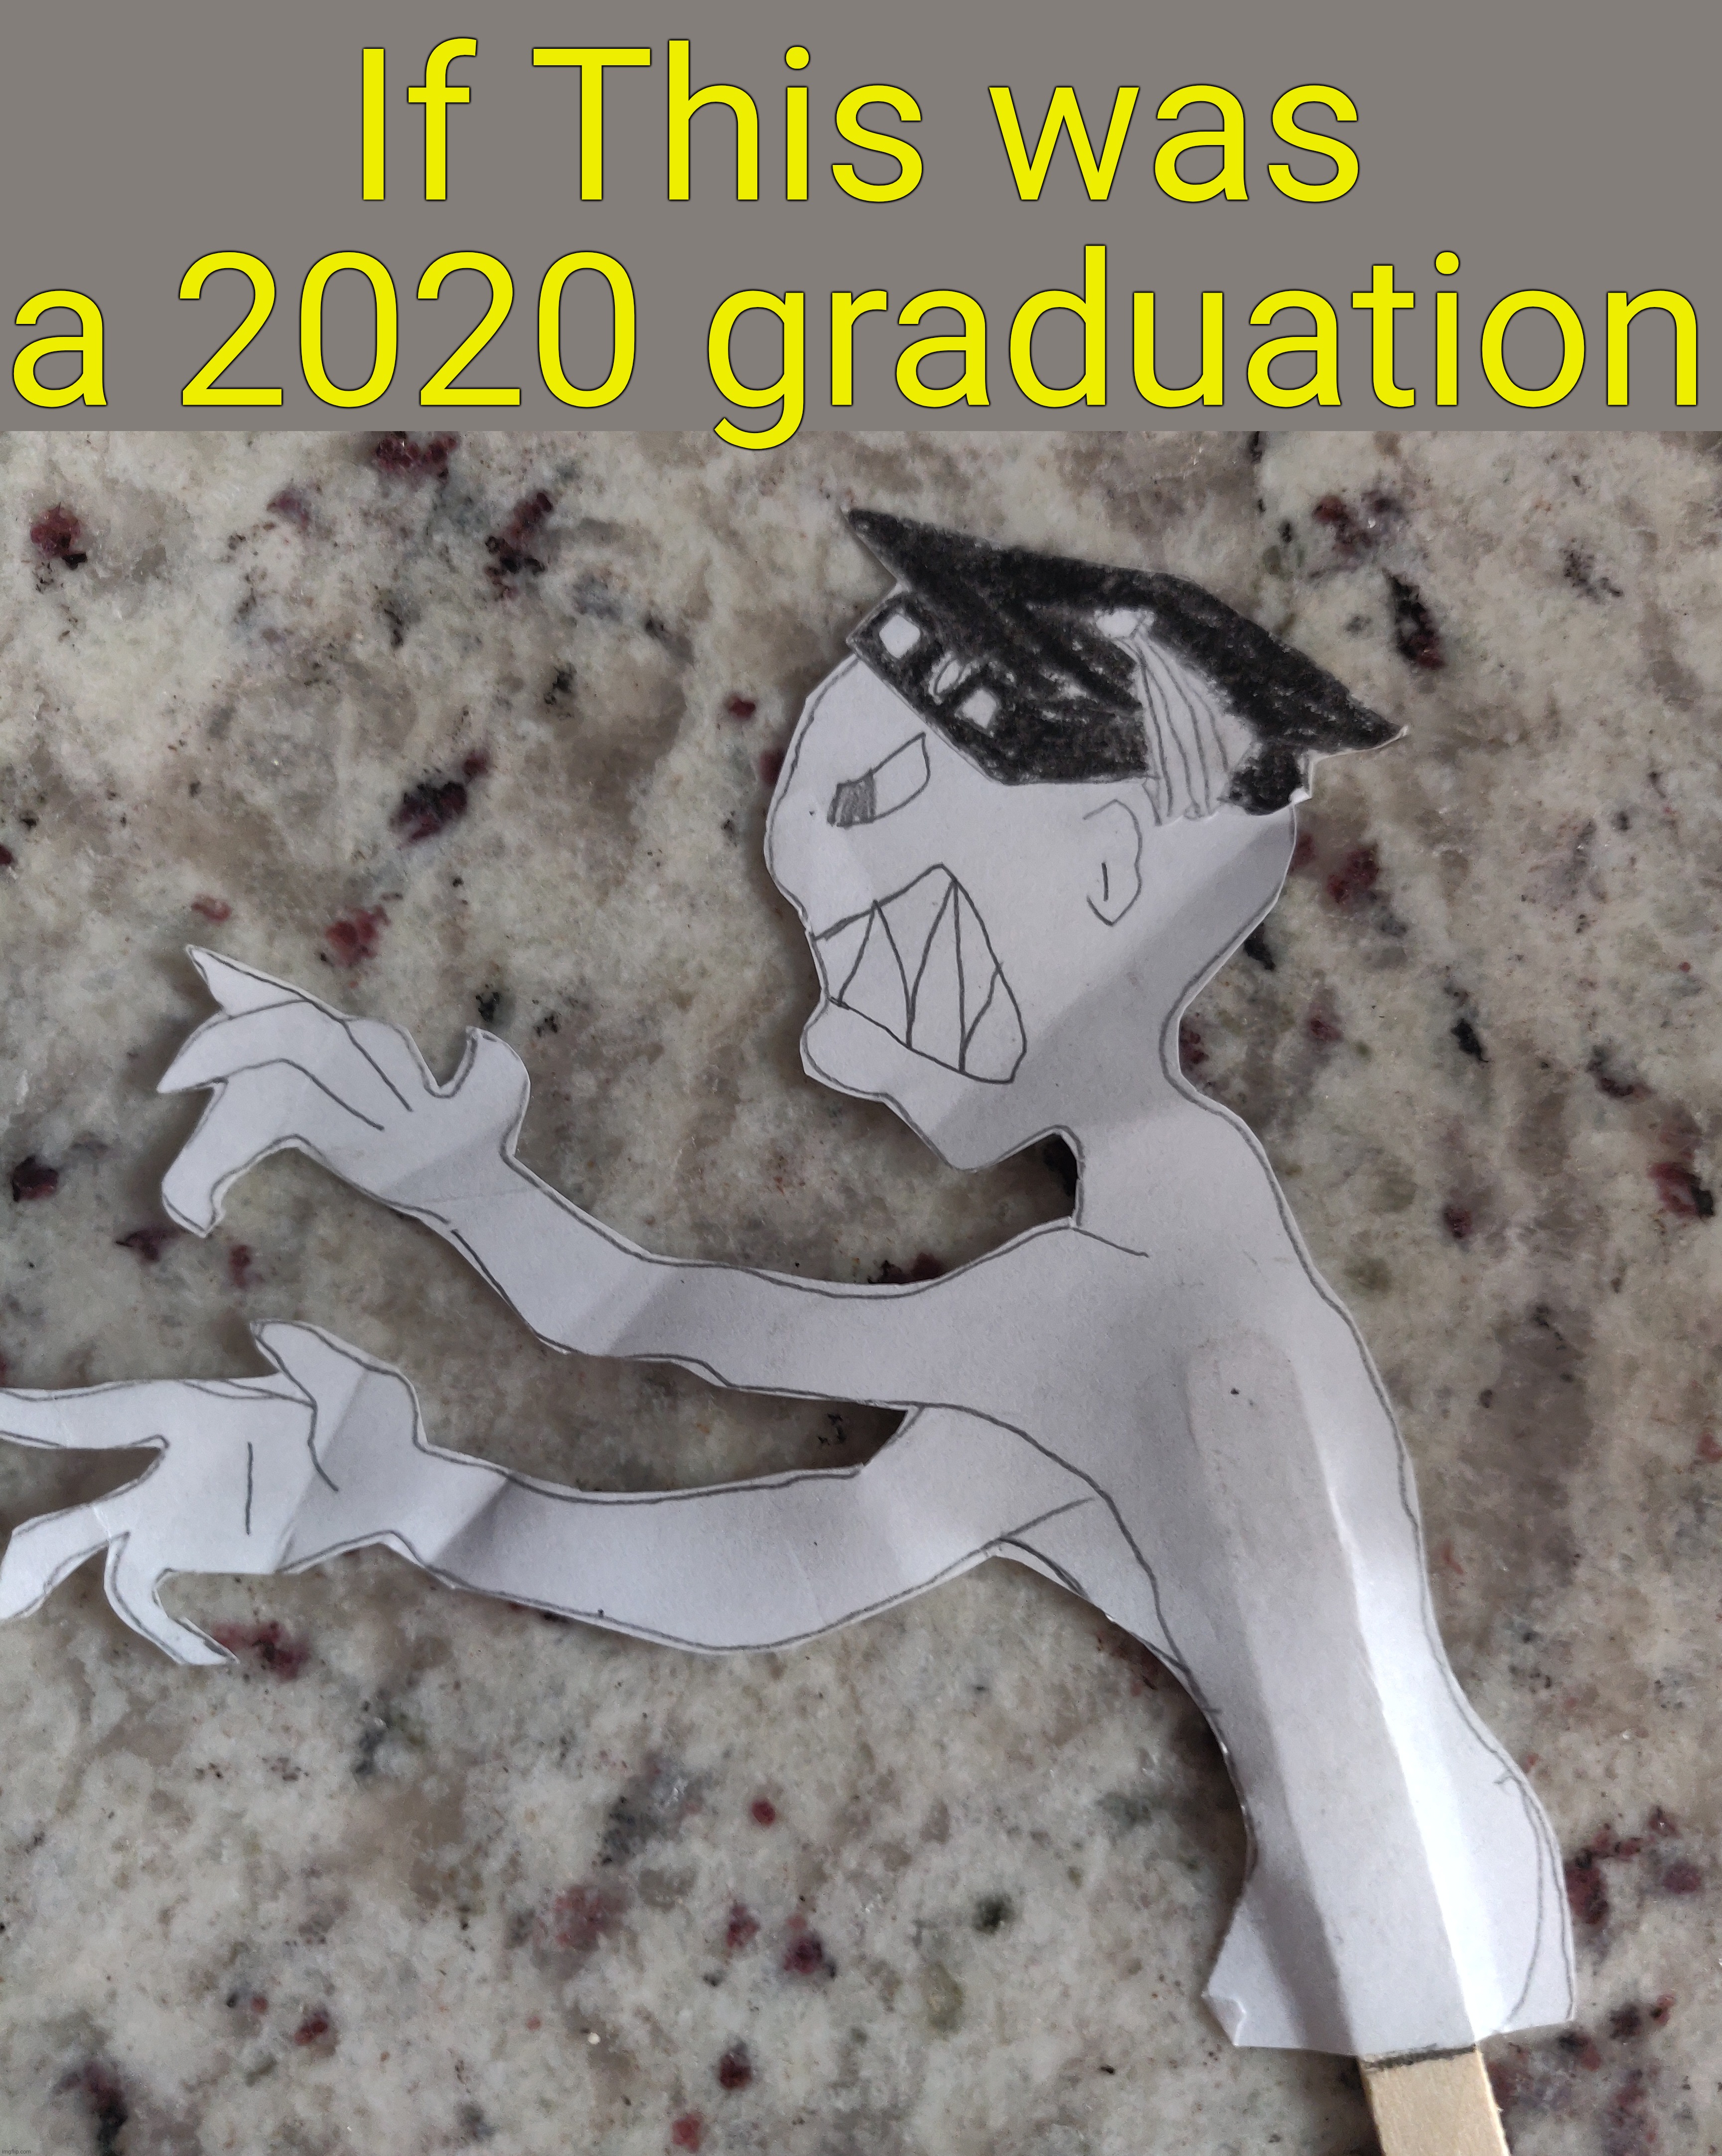 If 2020 had a graduation. | If This was a 2020 graduation | image tagged in memes,funny,2020,gifs,monster,graduation | made w/ Imgflip meme maker